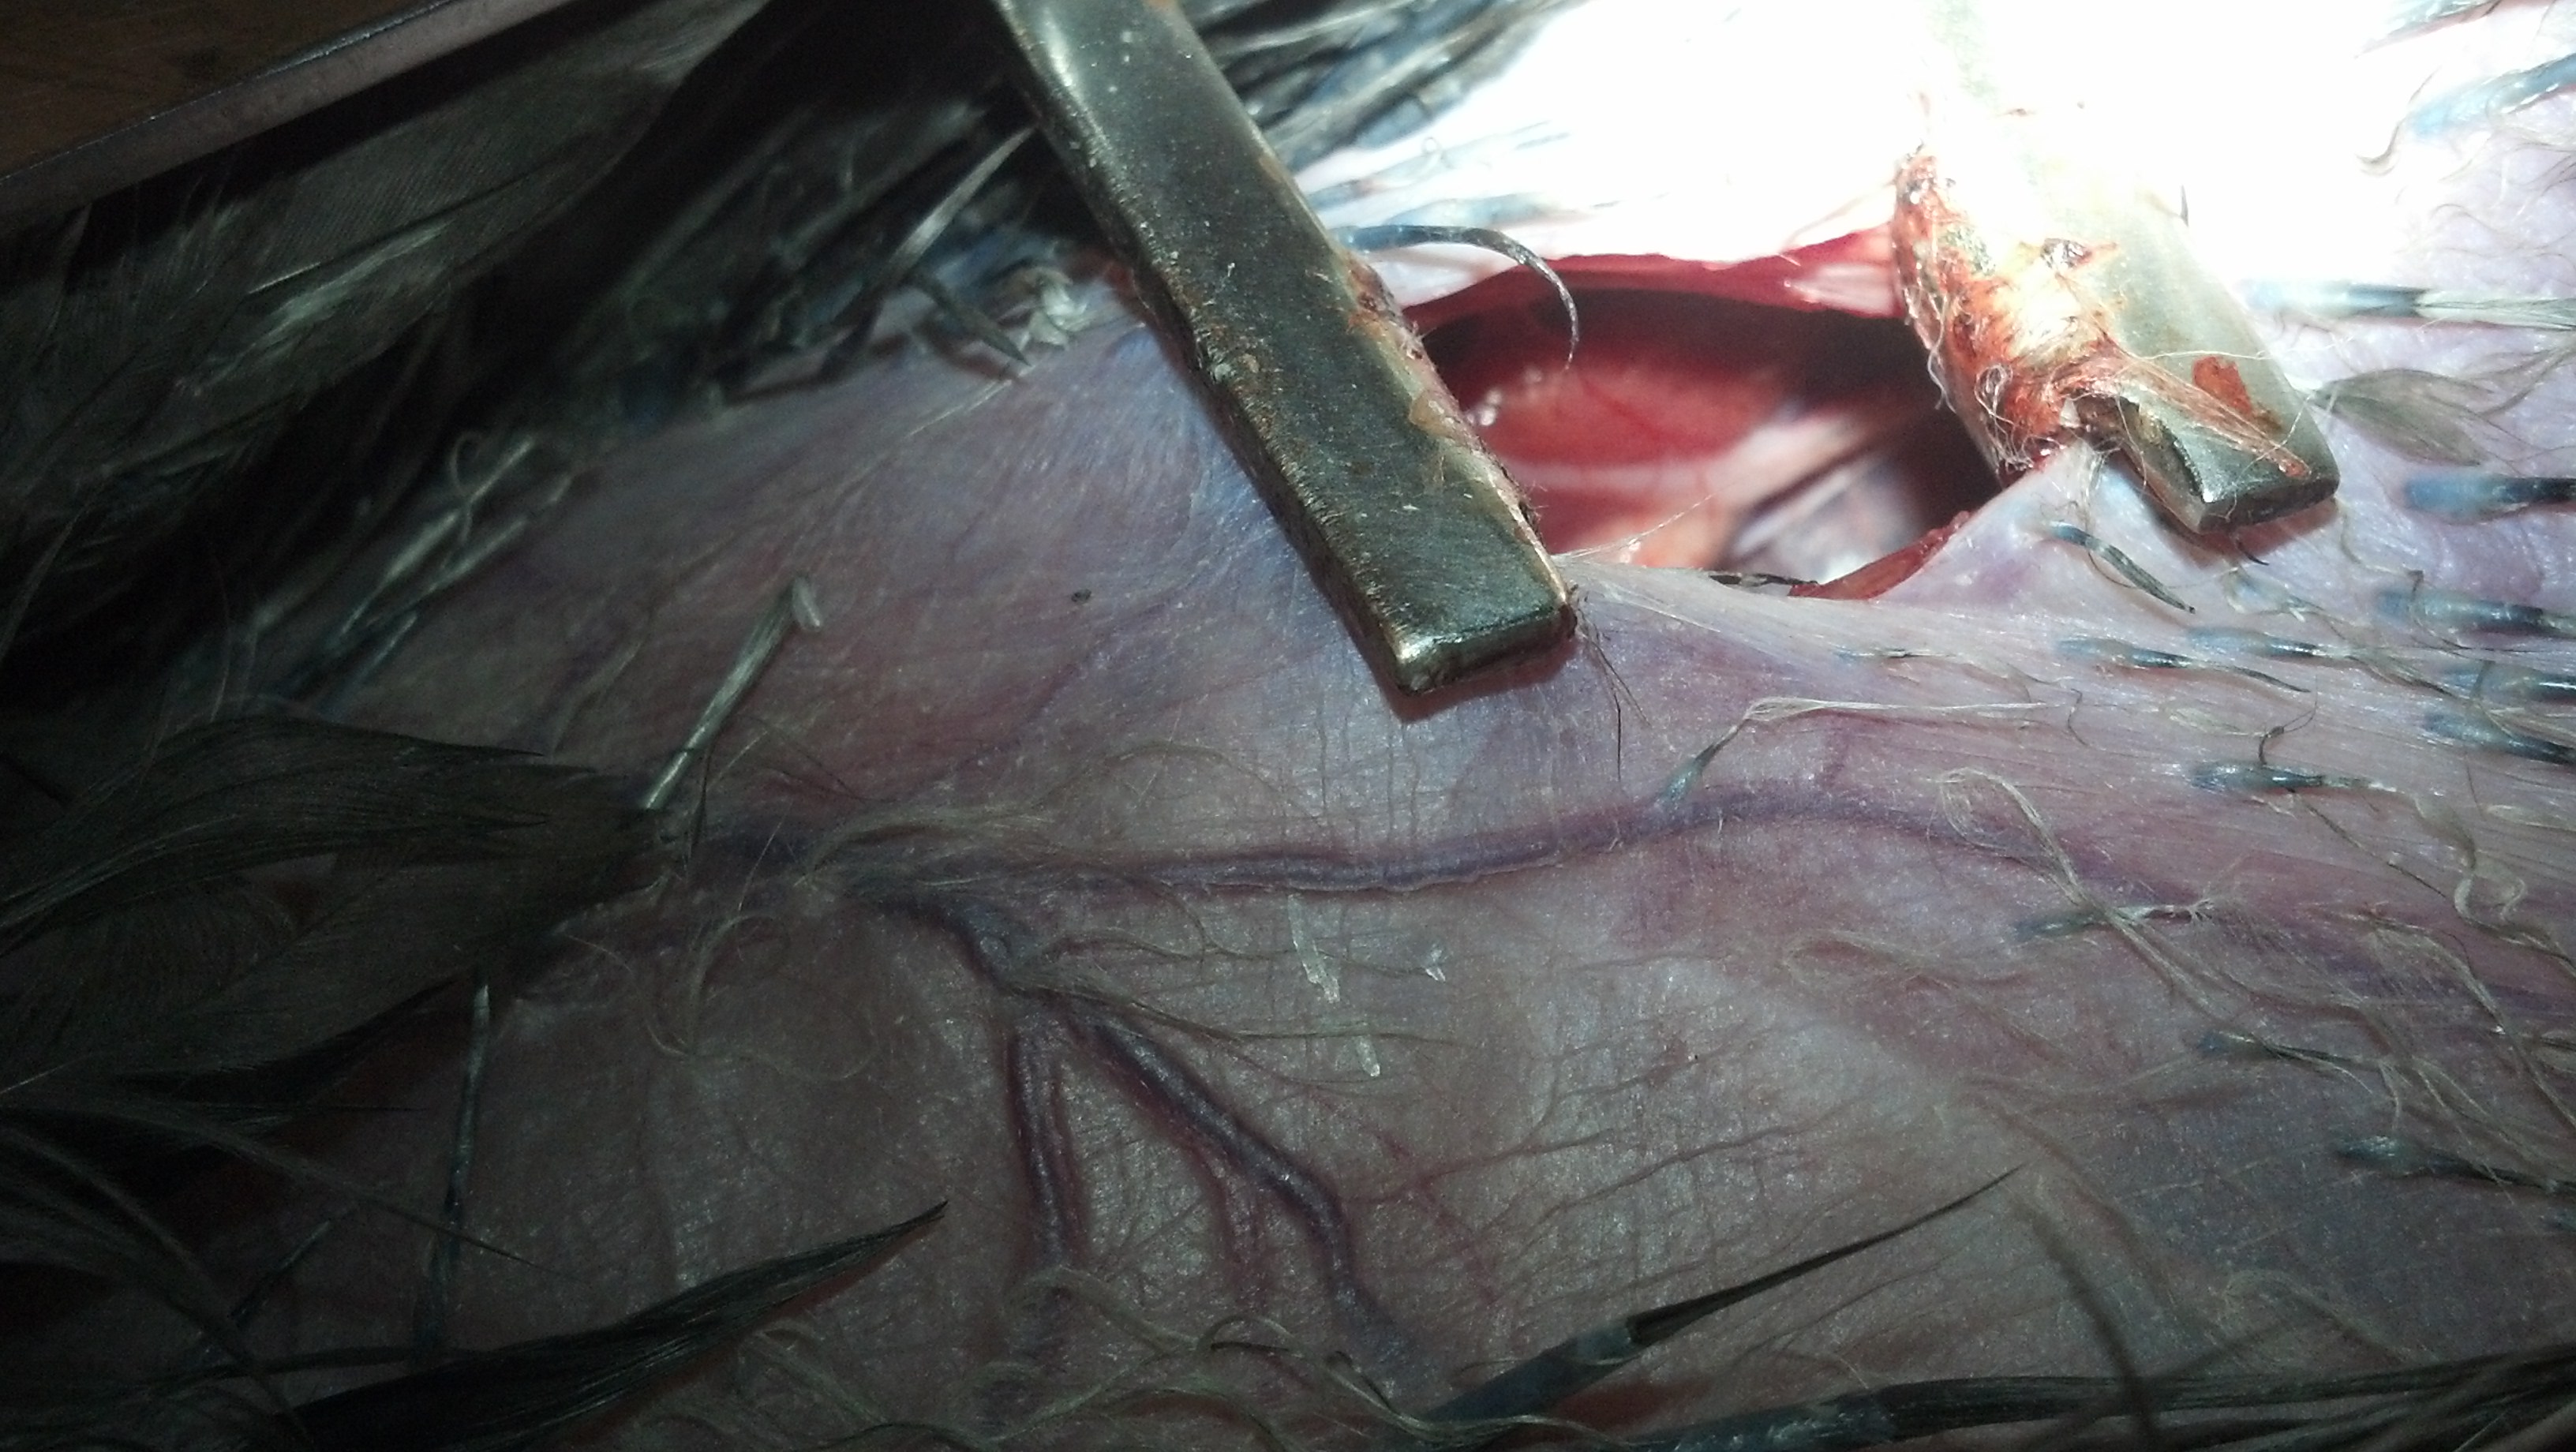 Poulardizing..the white string-like structure to the right is the oviduct